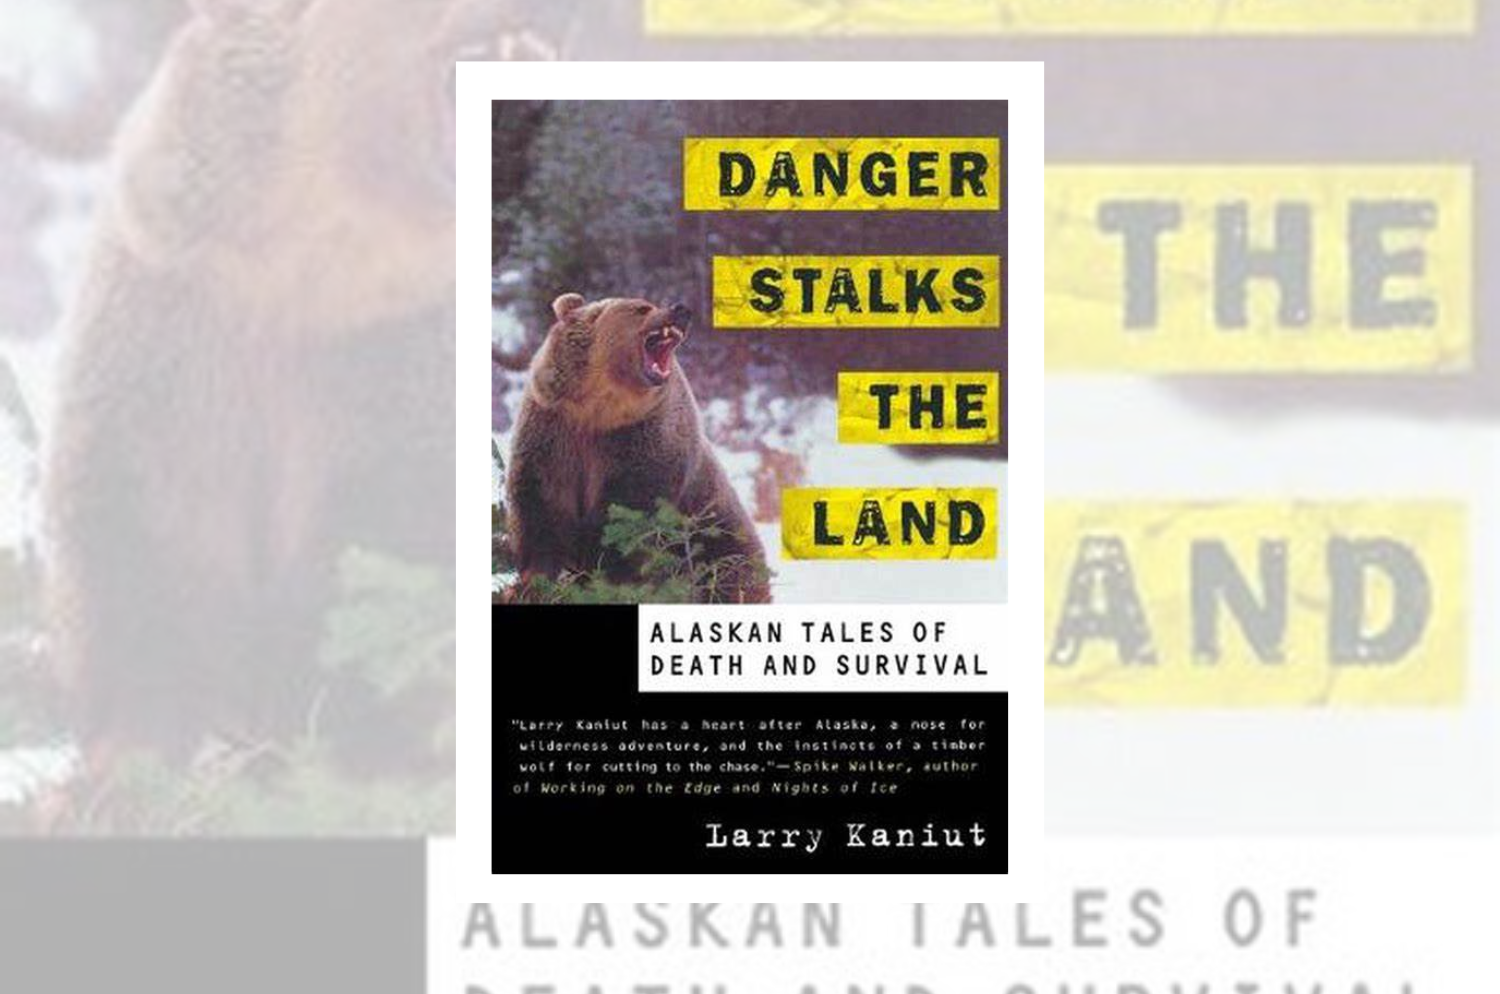 “Danger Stalks the Land: Alaskan Tales of Death and Survival” by Larry Kaniut